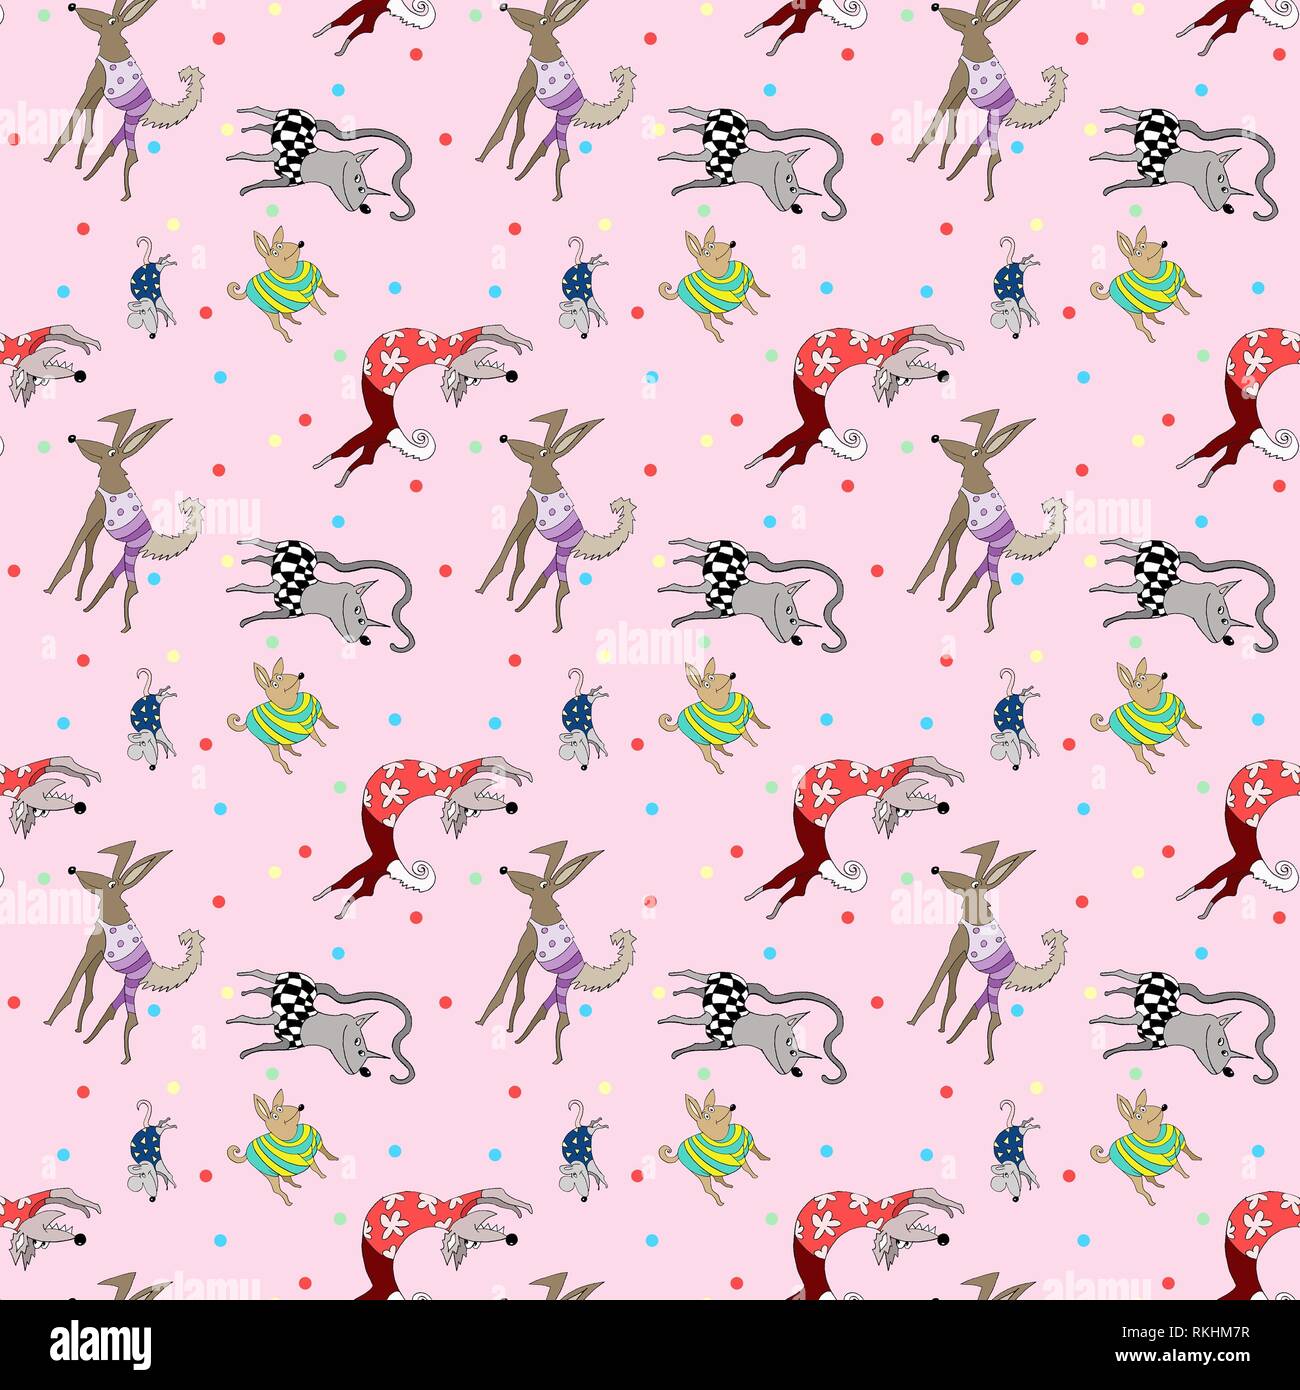 Wallpaper, wrapping paper, seamless pattern, crazy animals, dog, cat, mouse with clothes, background pink, Germany Stock Photo